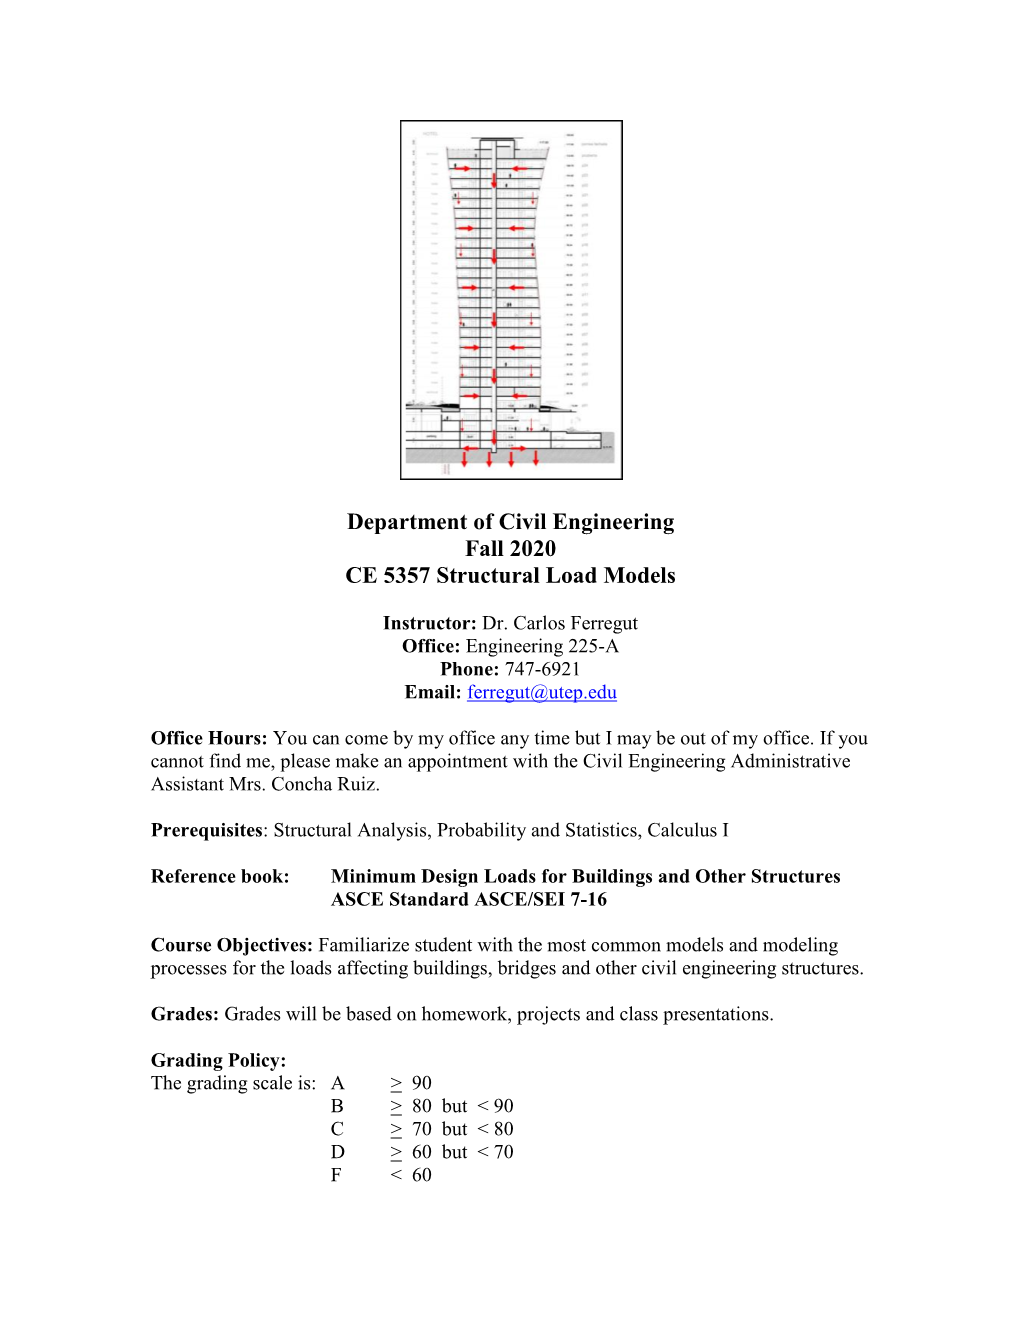 Department of Civil Engineering Fall 2020 CE 5357 Structural Load Models